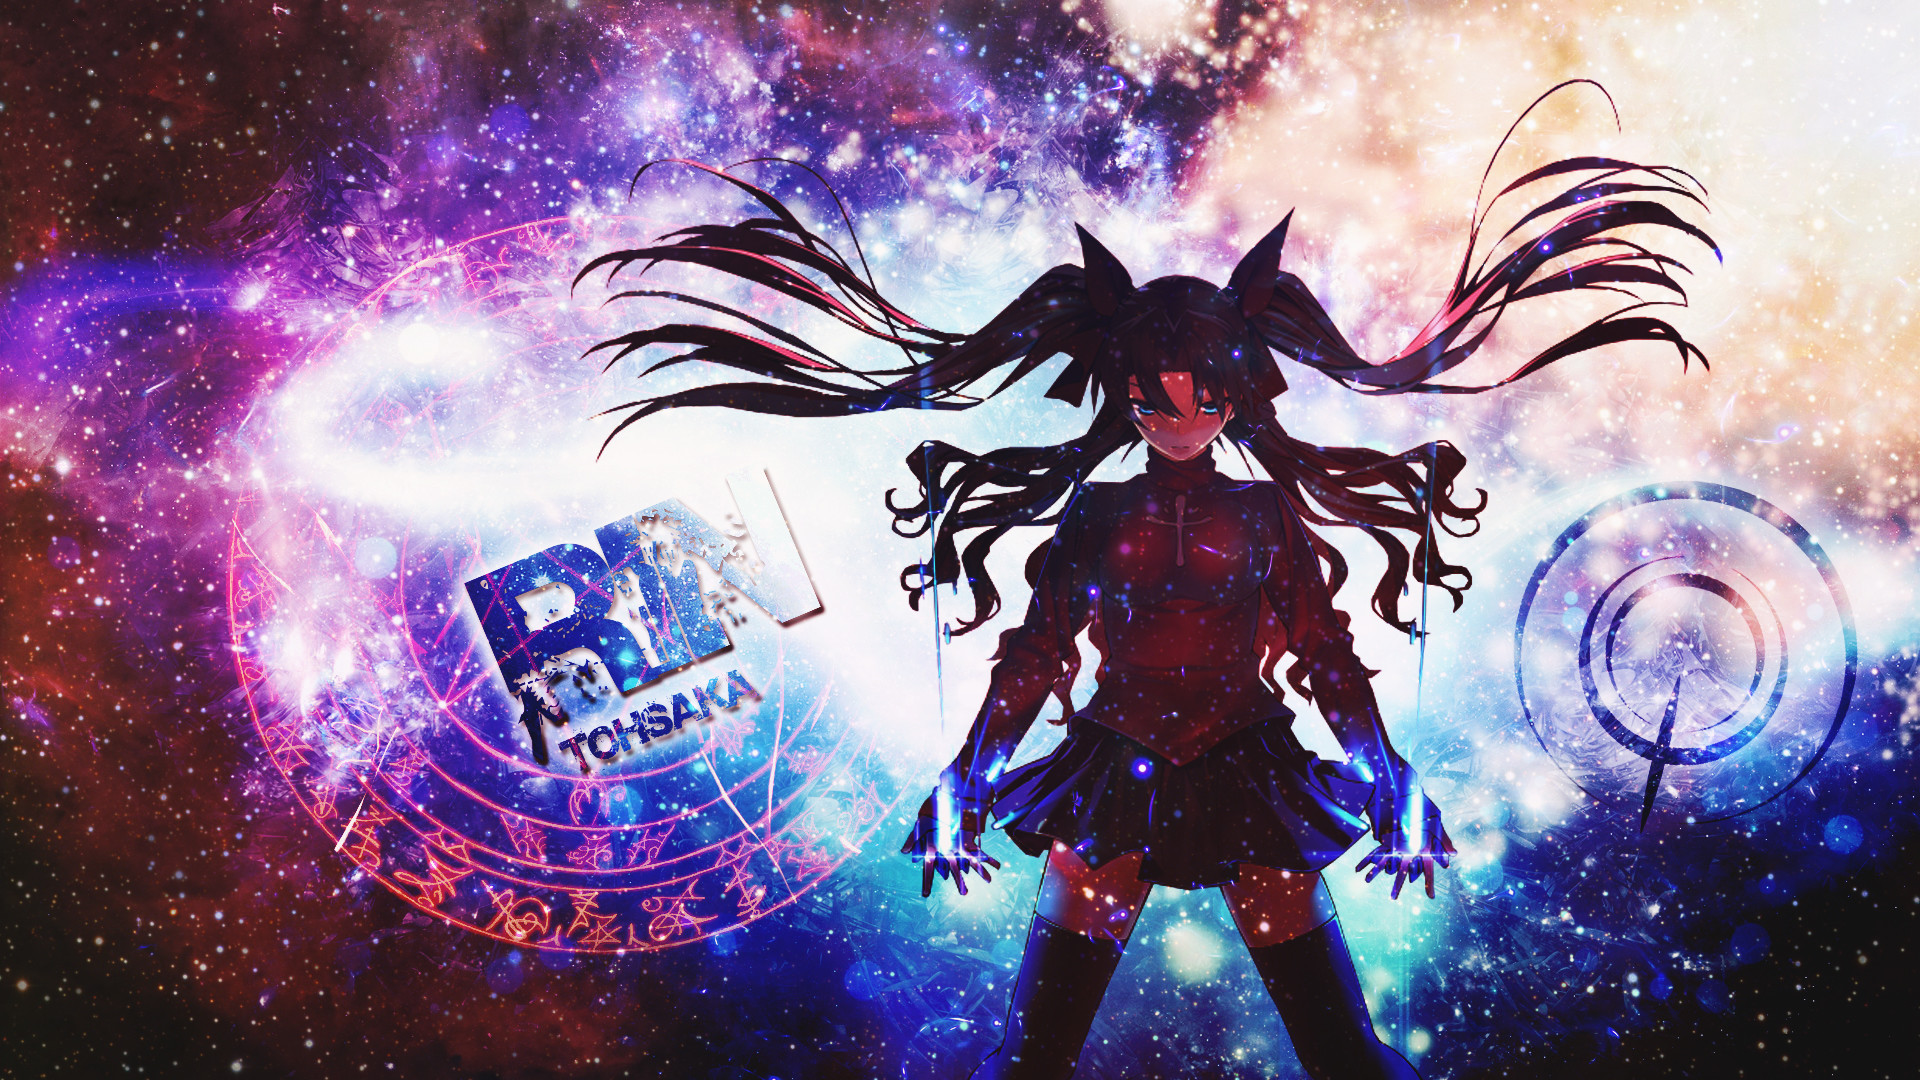 1920x1080 Works Rin Tohsaka Fate/Stay Night Unlimited Blade Works Wallpaper .